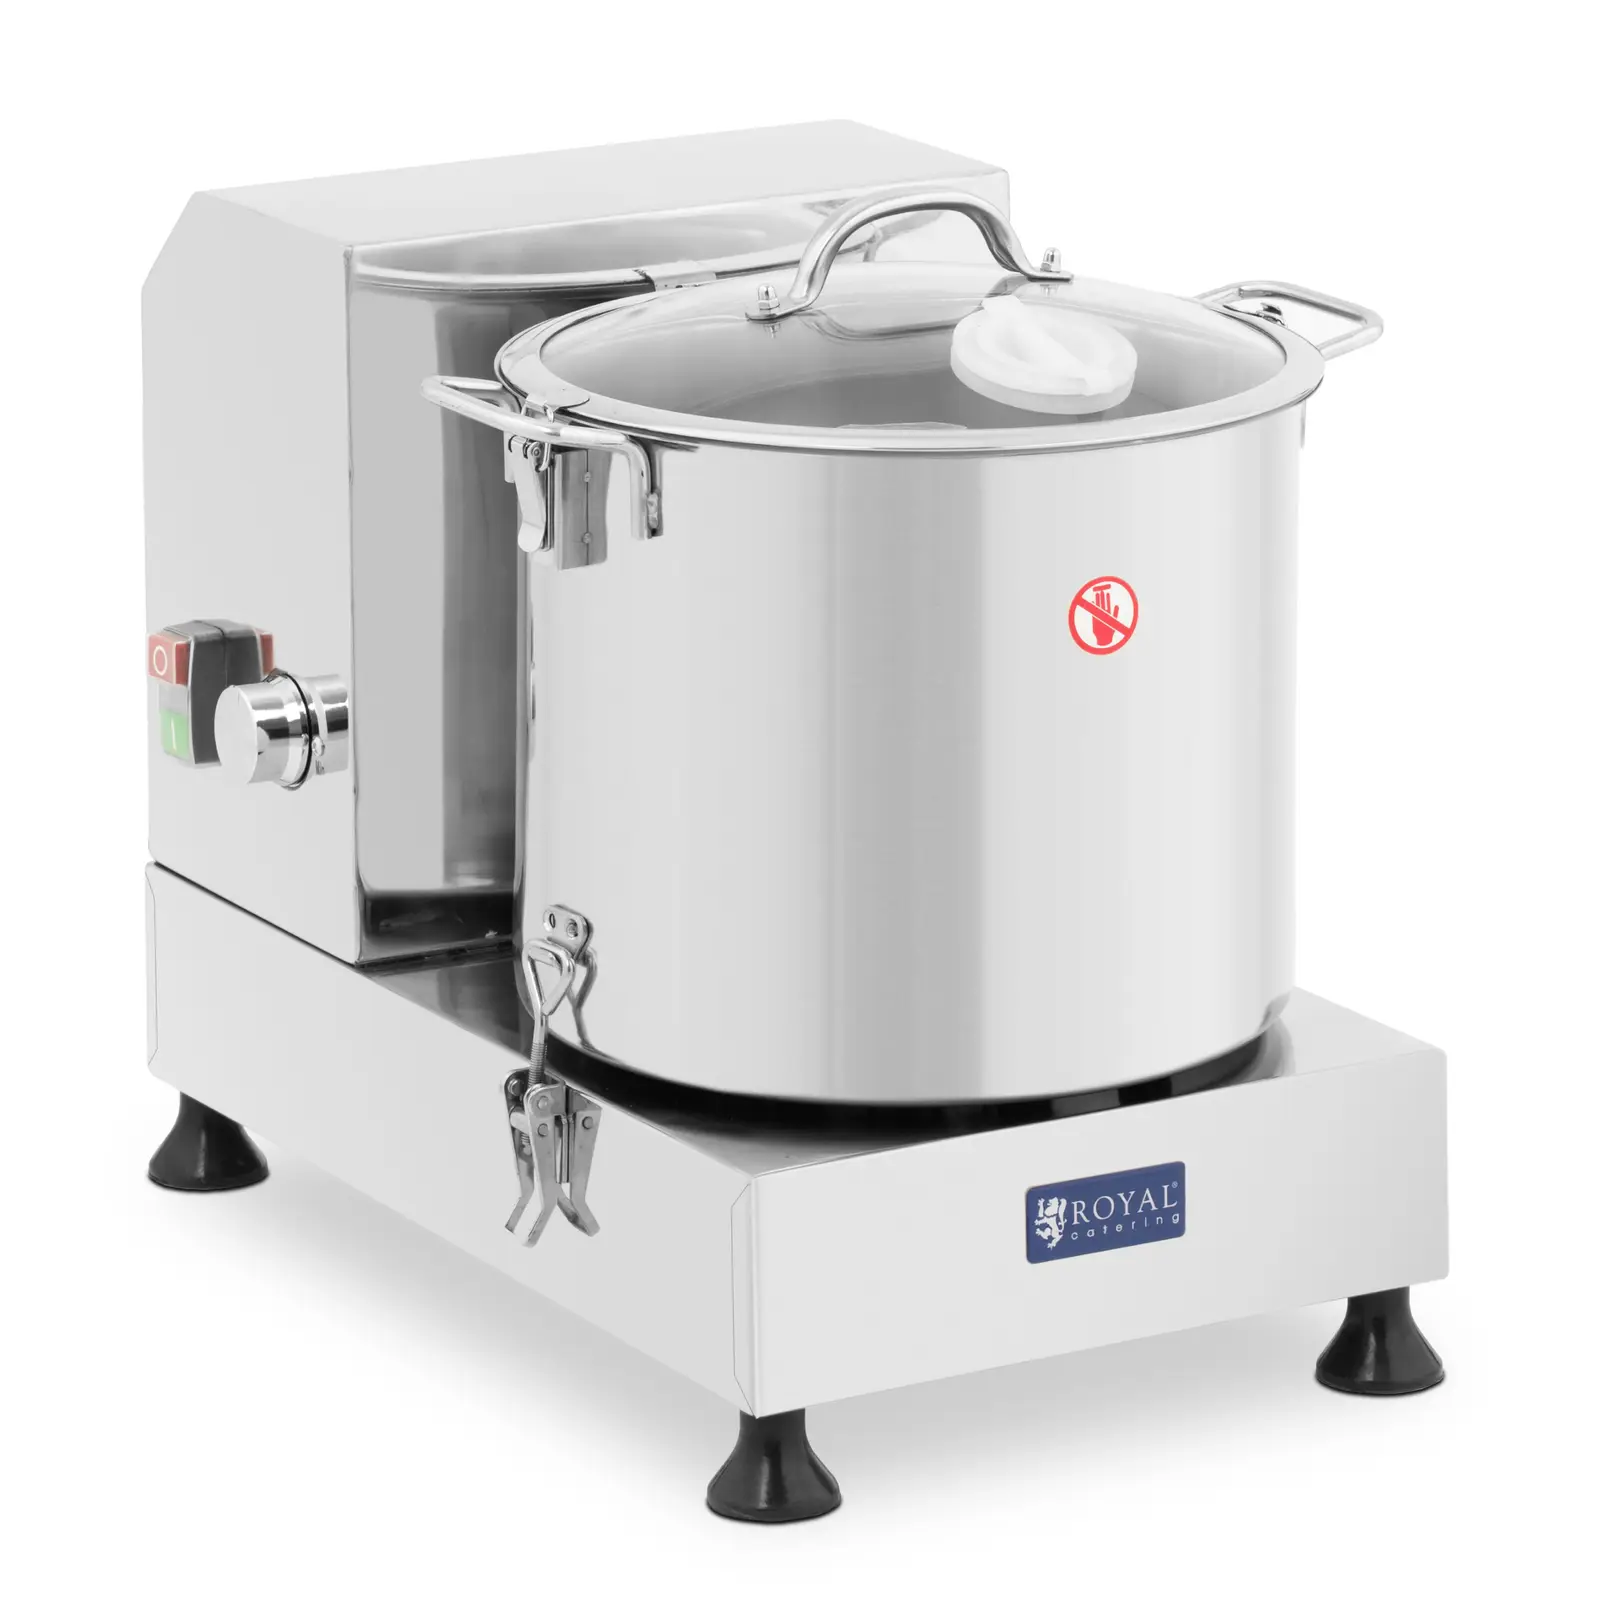 Foodprosessor- 1800 - 3500 rpm - 15 l - Royal Catering